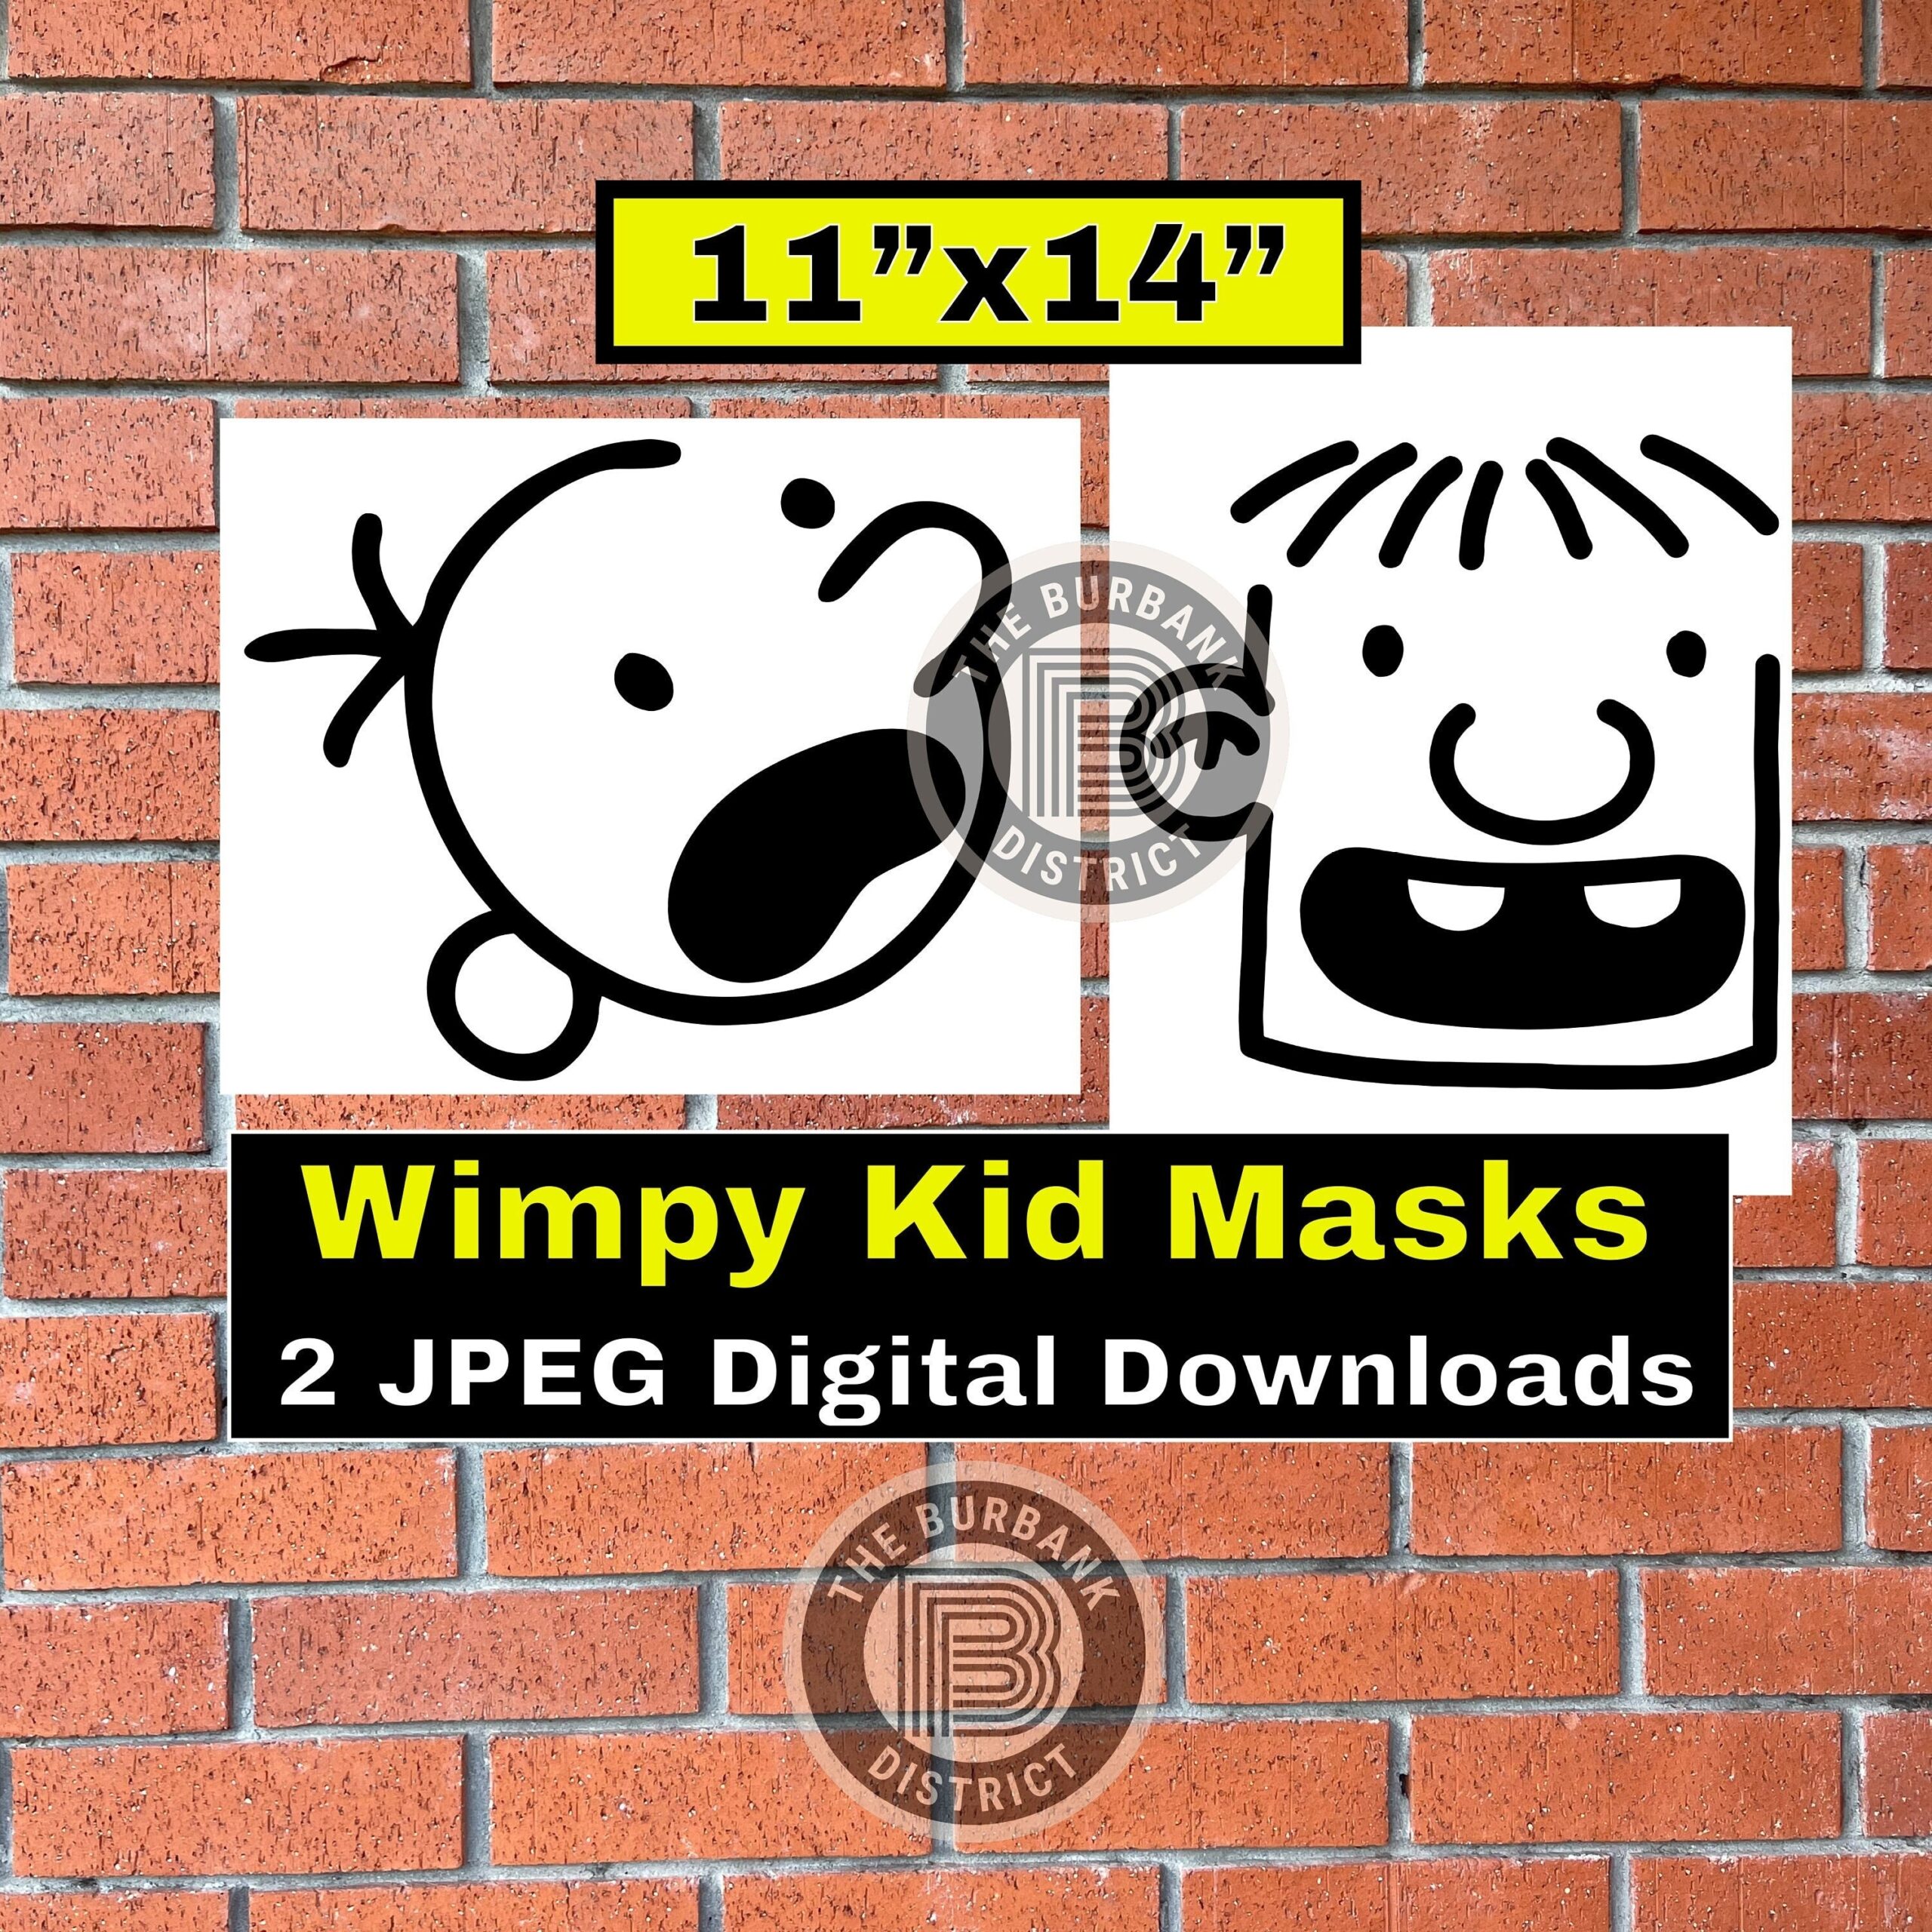 Wimpy Digital Download 11x14 Includes Two JPEG Files Great For Parties Costumes And Decorations Etsy